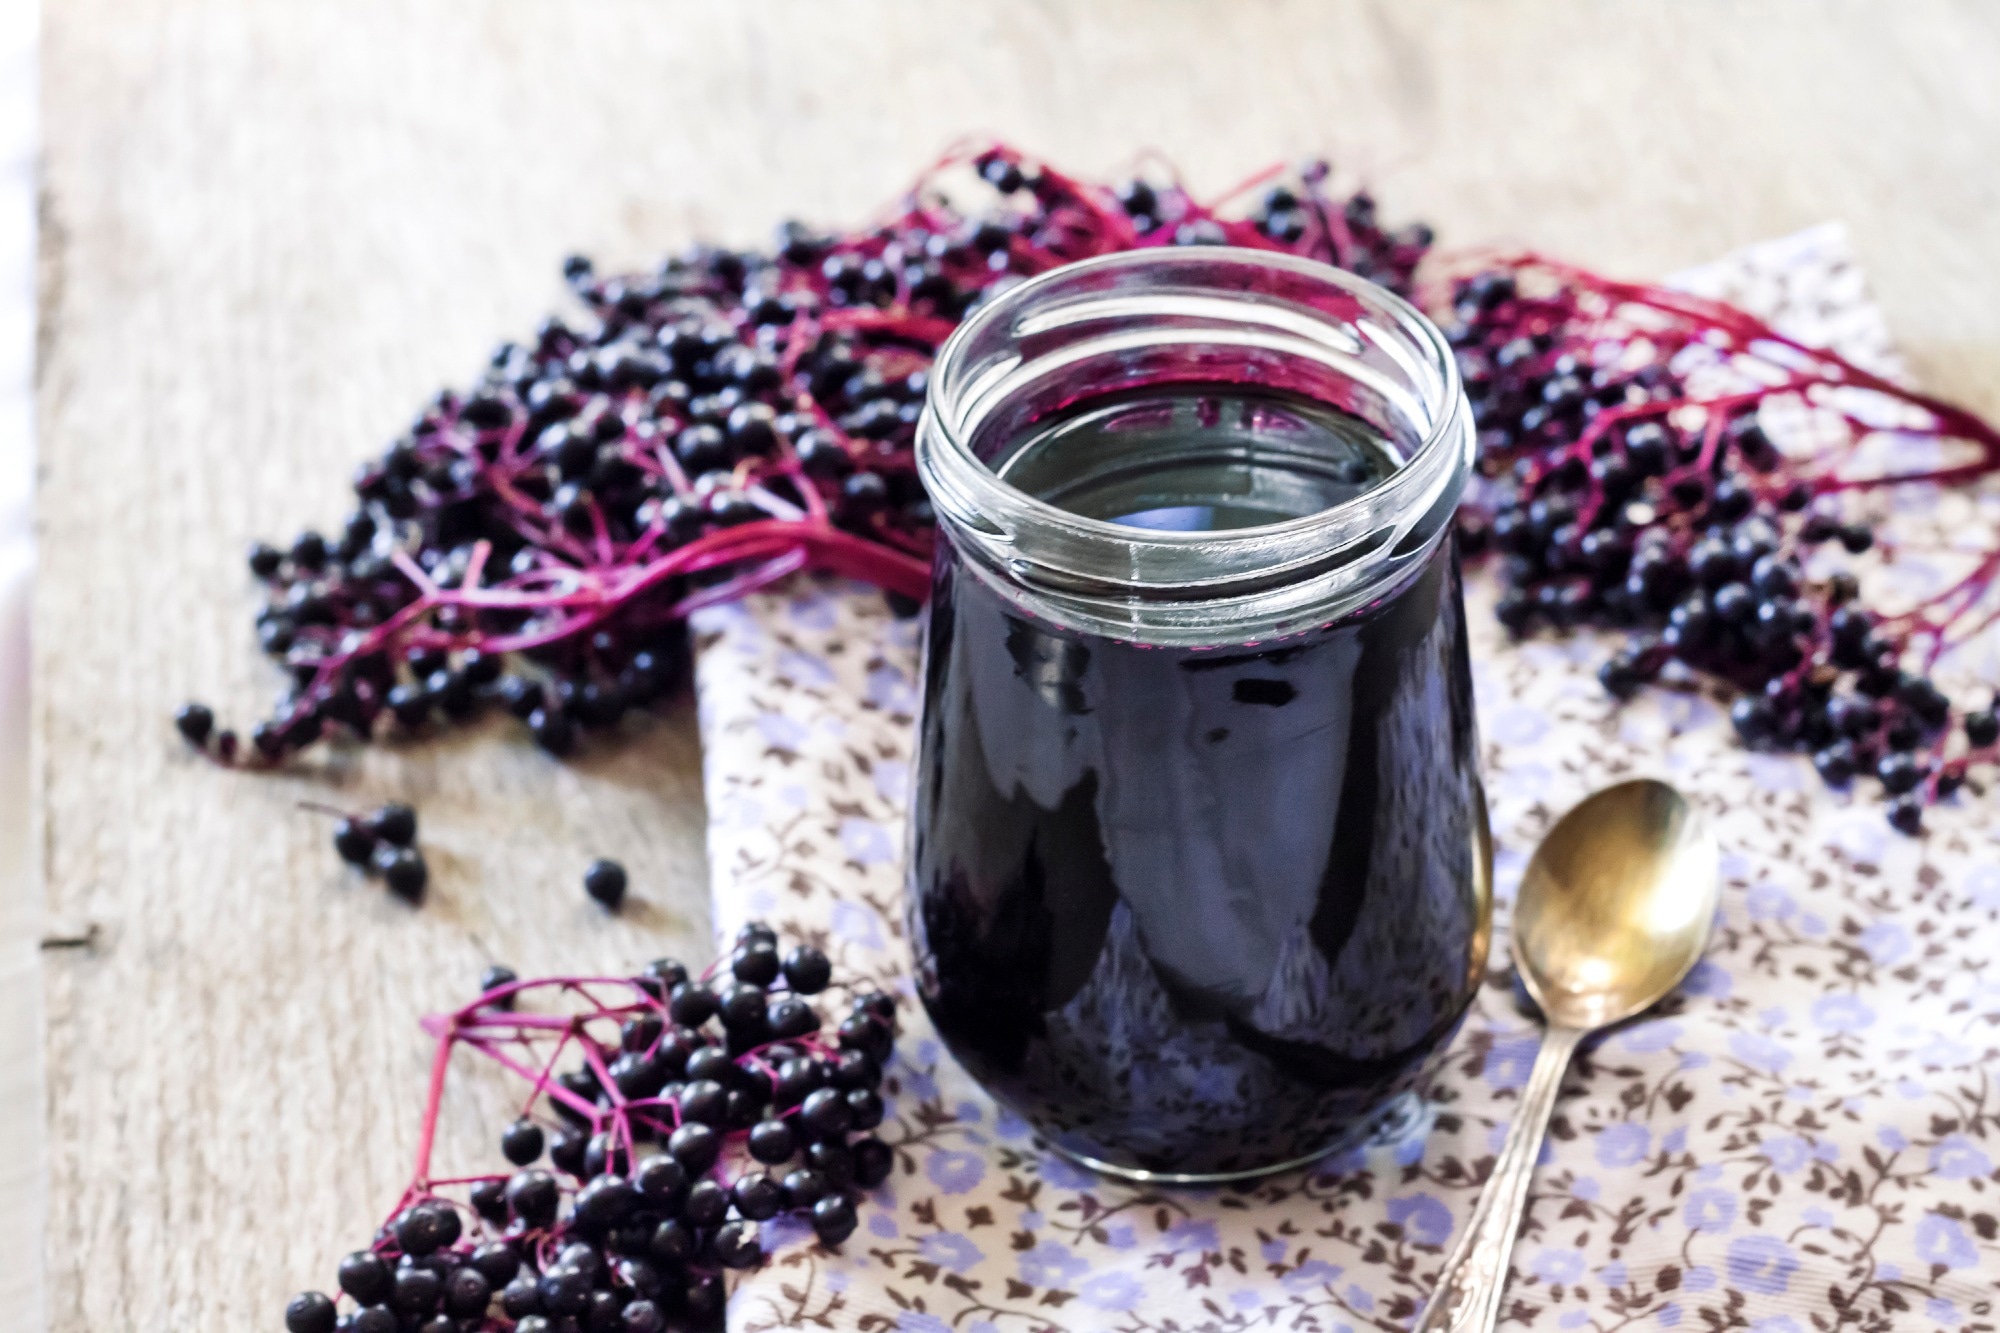 Study indicates that elderberry juice consumption increases carbohydrate oxidation in obese adults